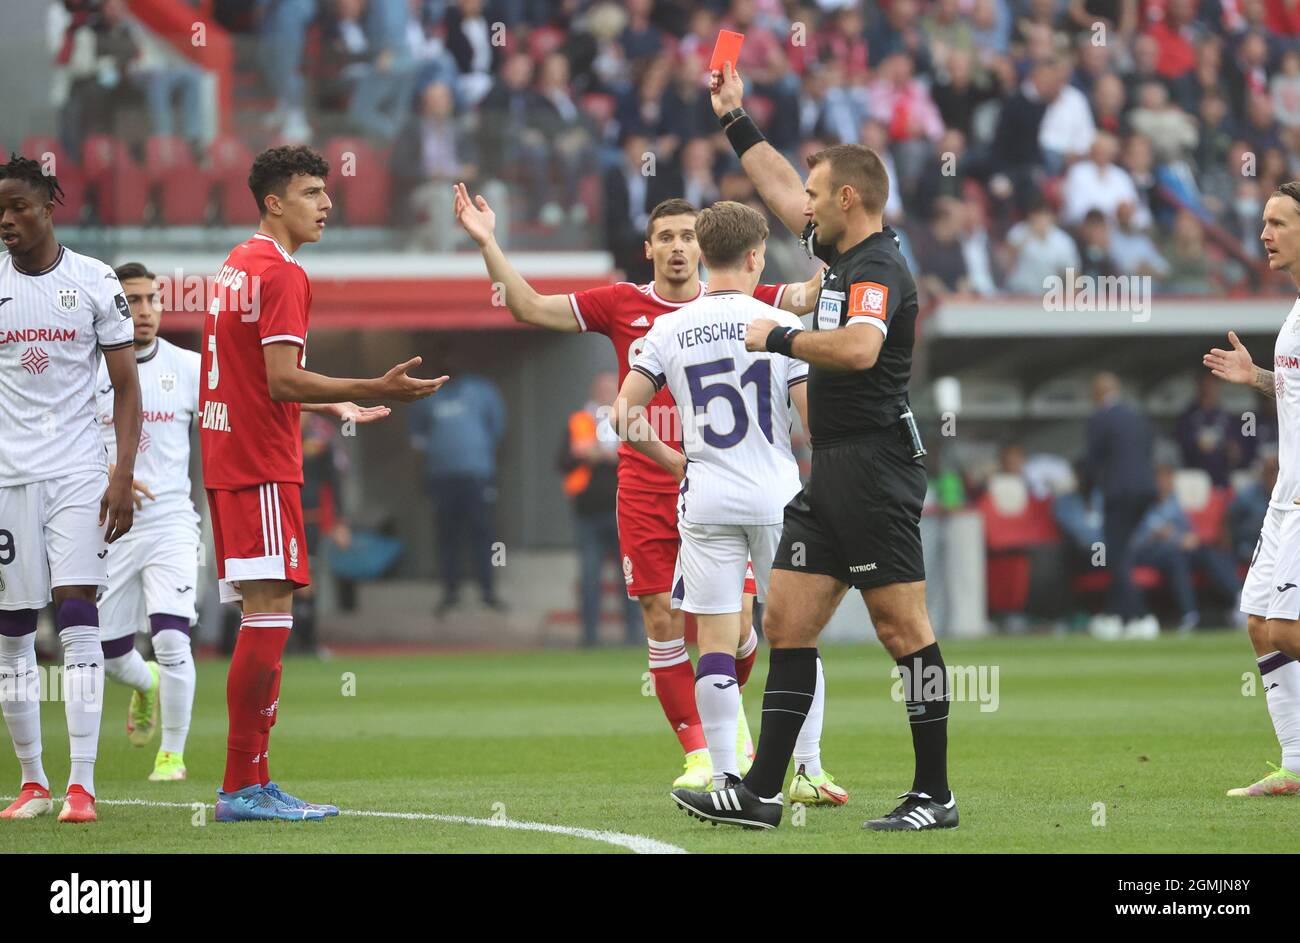 Standard's Amee Al-Dakhil receives a red card from referee Nicolas Laforge during a soccer match between Standard de Liege and RSC Anderlecht, Sunday Stock Photo